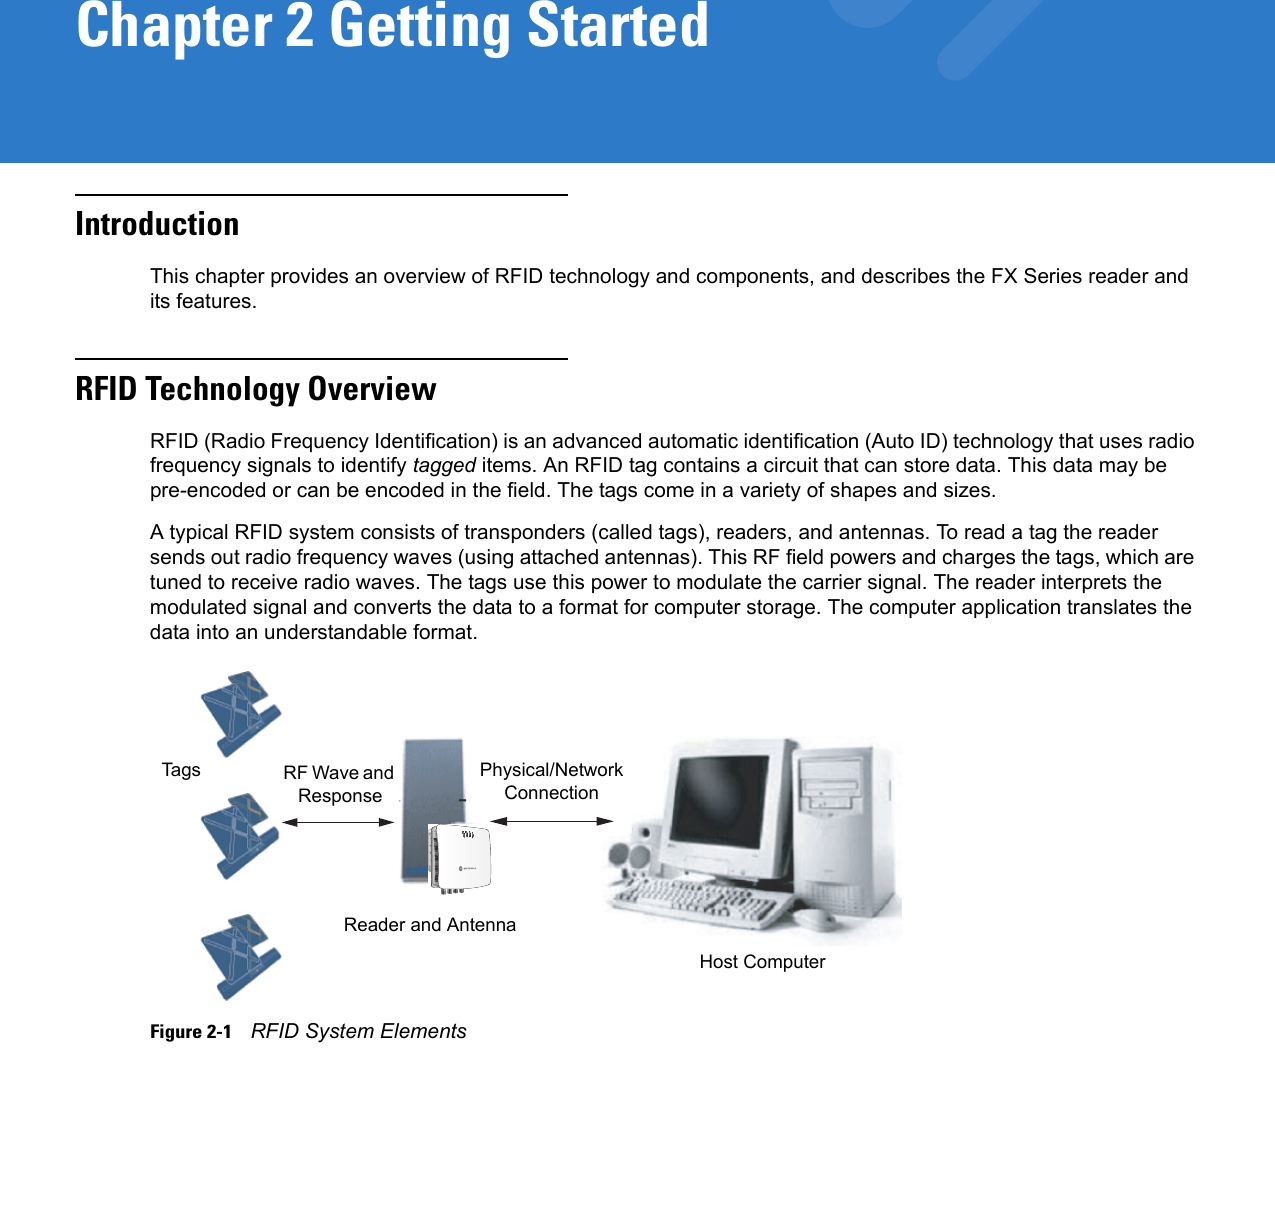 Chapter 2 Getting StartedIntroductionThis chapter provides an overview of RFID technology and components, and describes the FX Series reader and its features.RFID Technology OverviewRFID (Radio Frequency Identification) is an advanced automatic identification (Auto ID) technology that uses radio frequency signals to identify tagged items. An RFID tag contains a circuit that can store data. This data may be pre-encoded or can be encoded in the field. The tags come in a variety of shapes and sizes. A typical RFID system consists of transponders (called tags), readers, and antennas. To read a tag the reader sends out radio frequency waves (using attached antennas). This RF field powers and charges the tags, which are tuned to receive radio waves. The tags use this power to modulate the carrier signal. The reader interprets the modulated signal and converts the data to a format for computer storage. The computer application translates the data into an understandable format.Figure 2-1    RFID System ElementsReader and AntennaHost ComputerPhysical/Network ConnectionRF Wave and ResponseTags